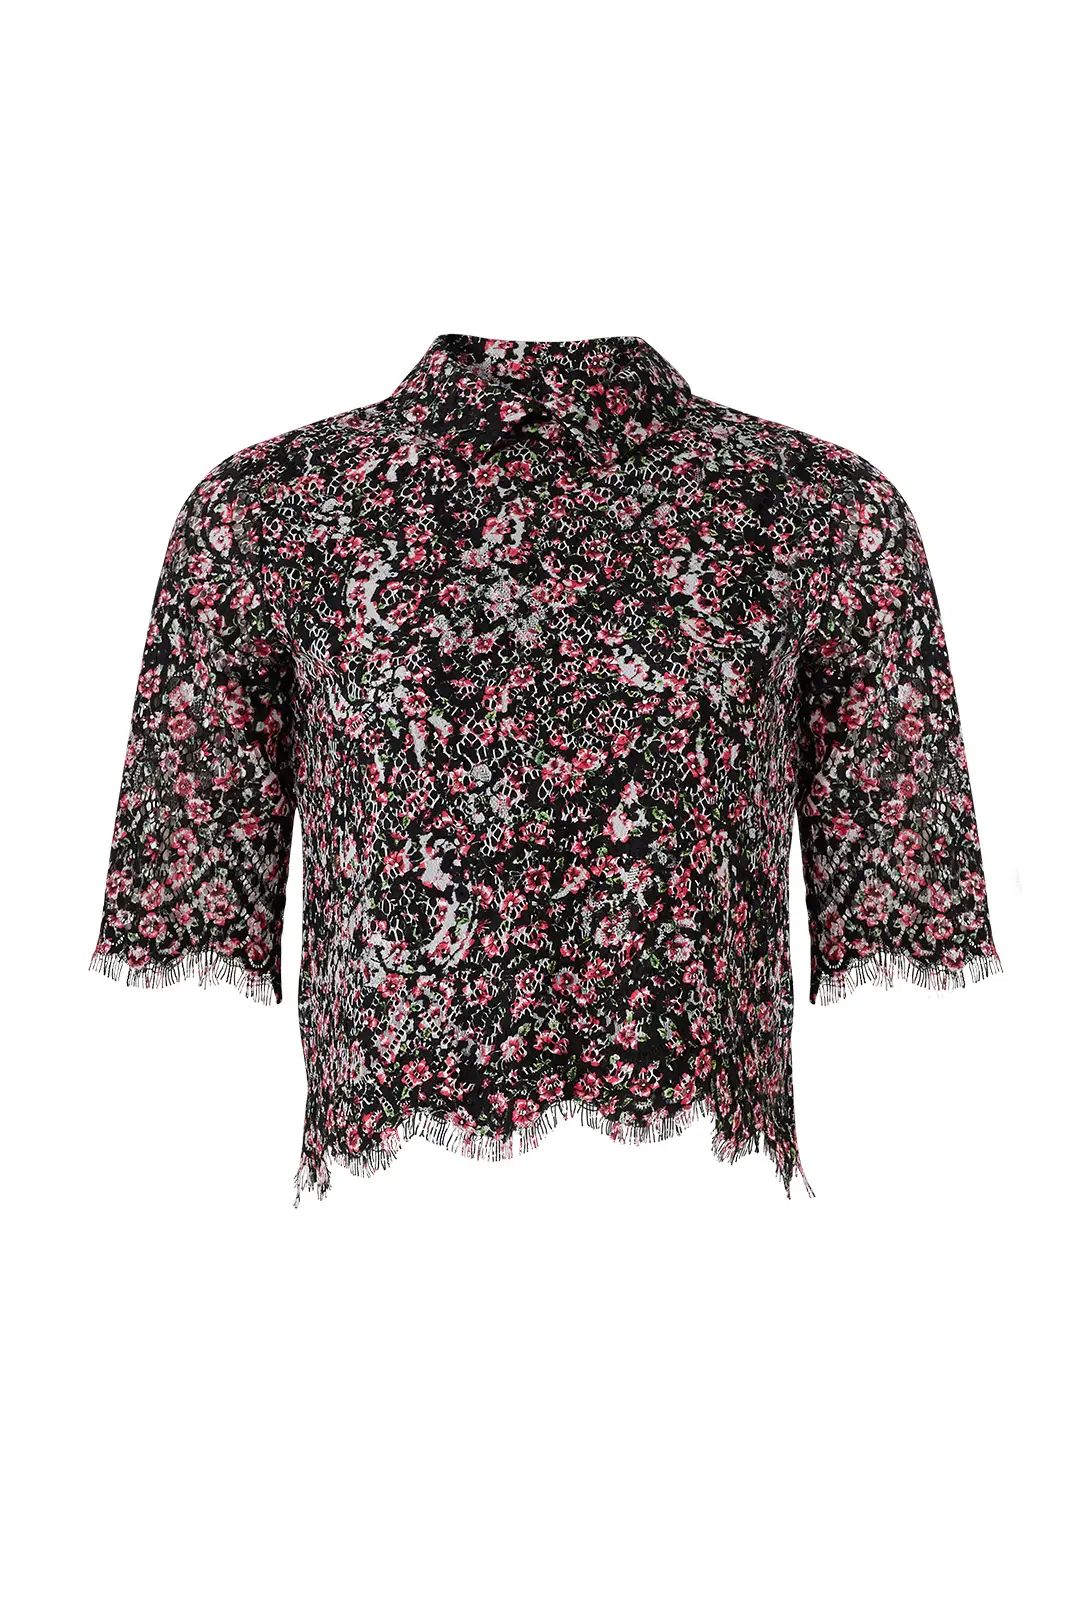 The Kooples Floral Lace Top | Rent The Runway